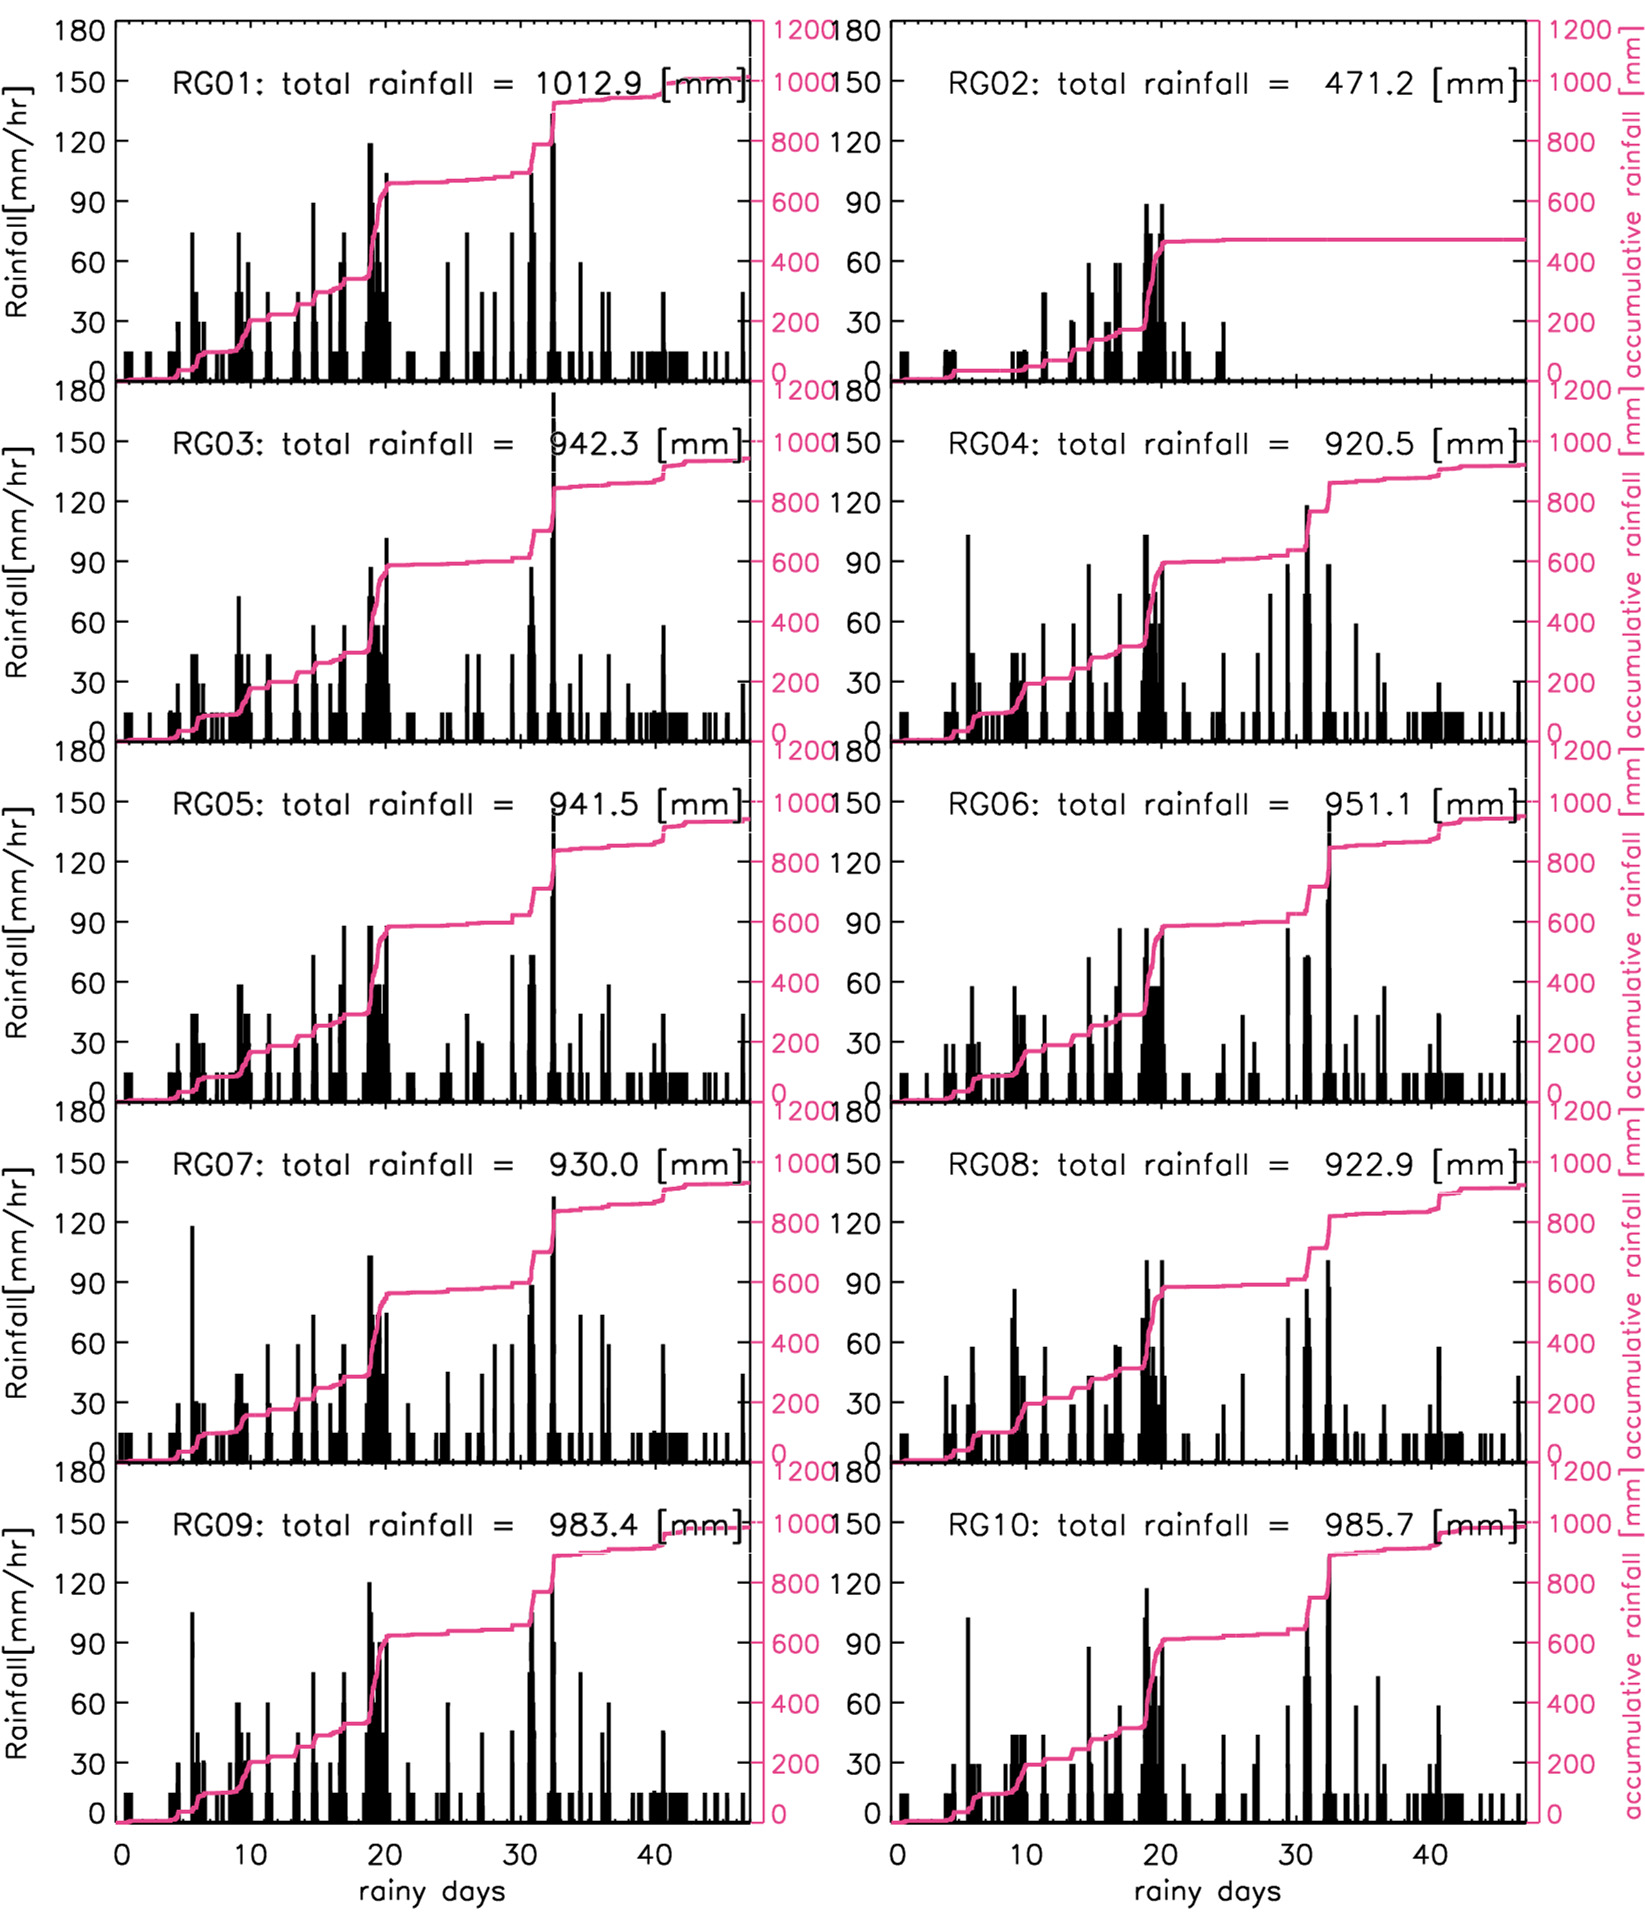 Rainfall amount during June to August, 2011 at each rain gauge observation site. The black column indicates 1-min rainfall amount and the pink line corresponds to the total accumulative rainfall amount with time.